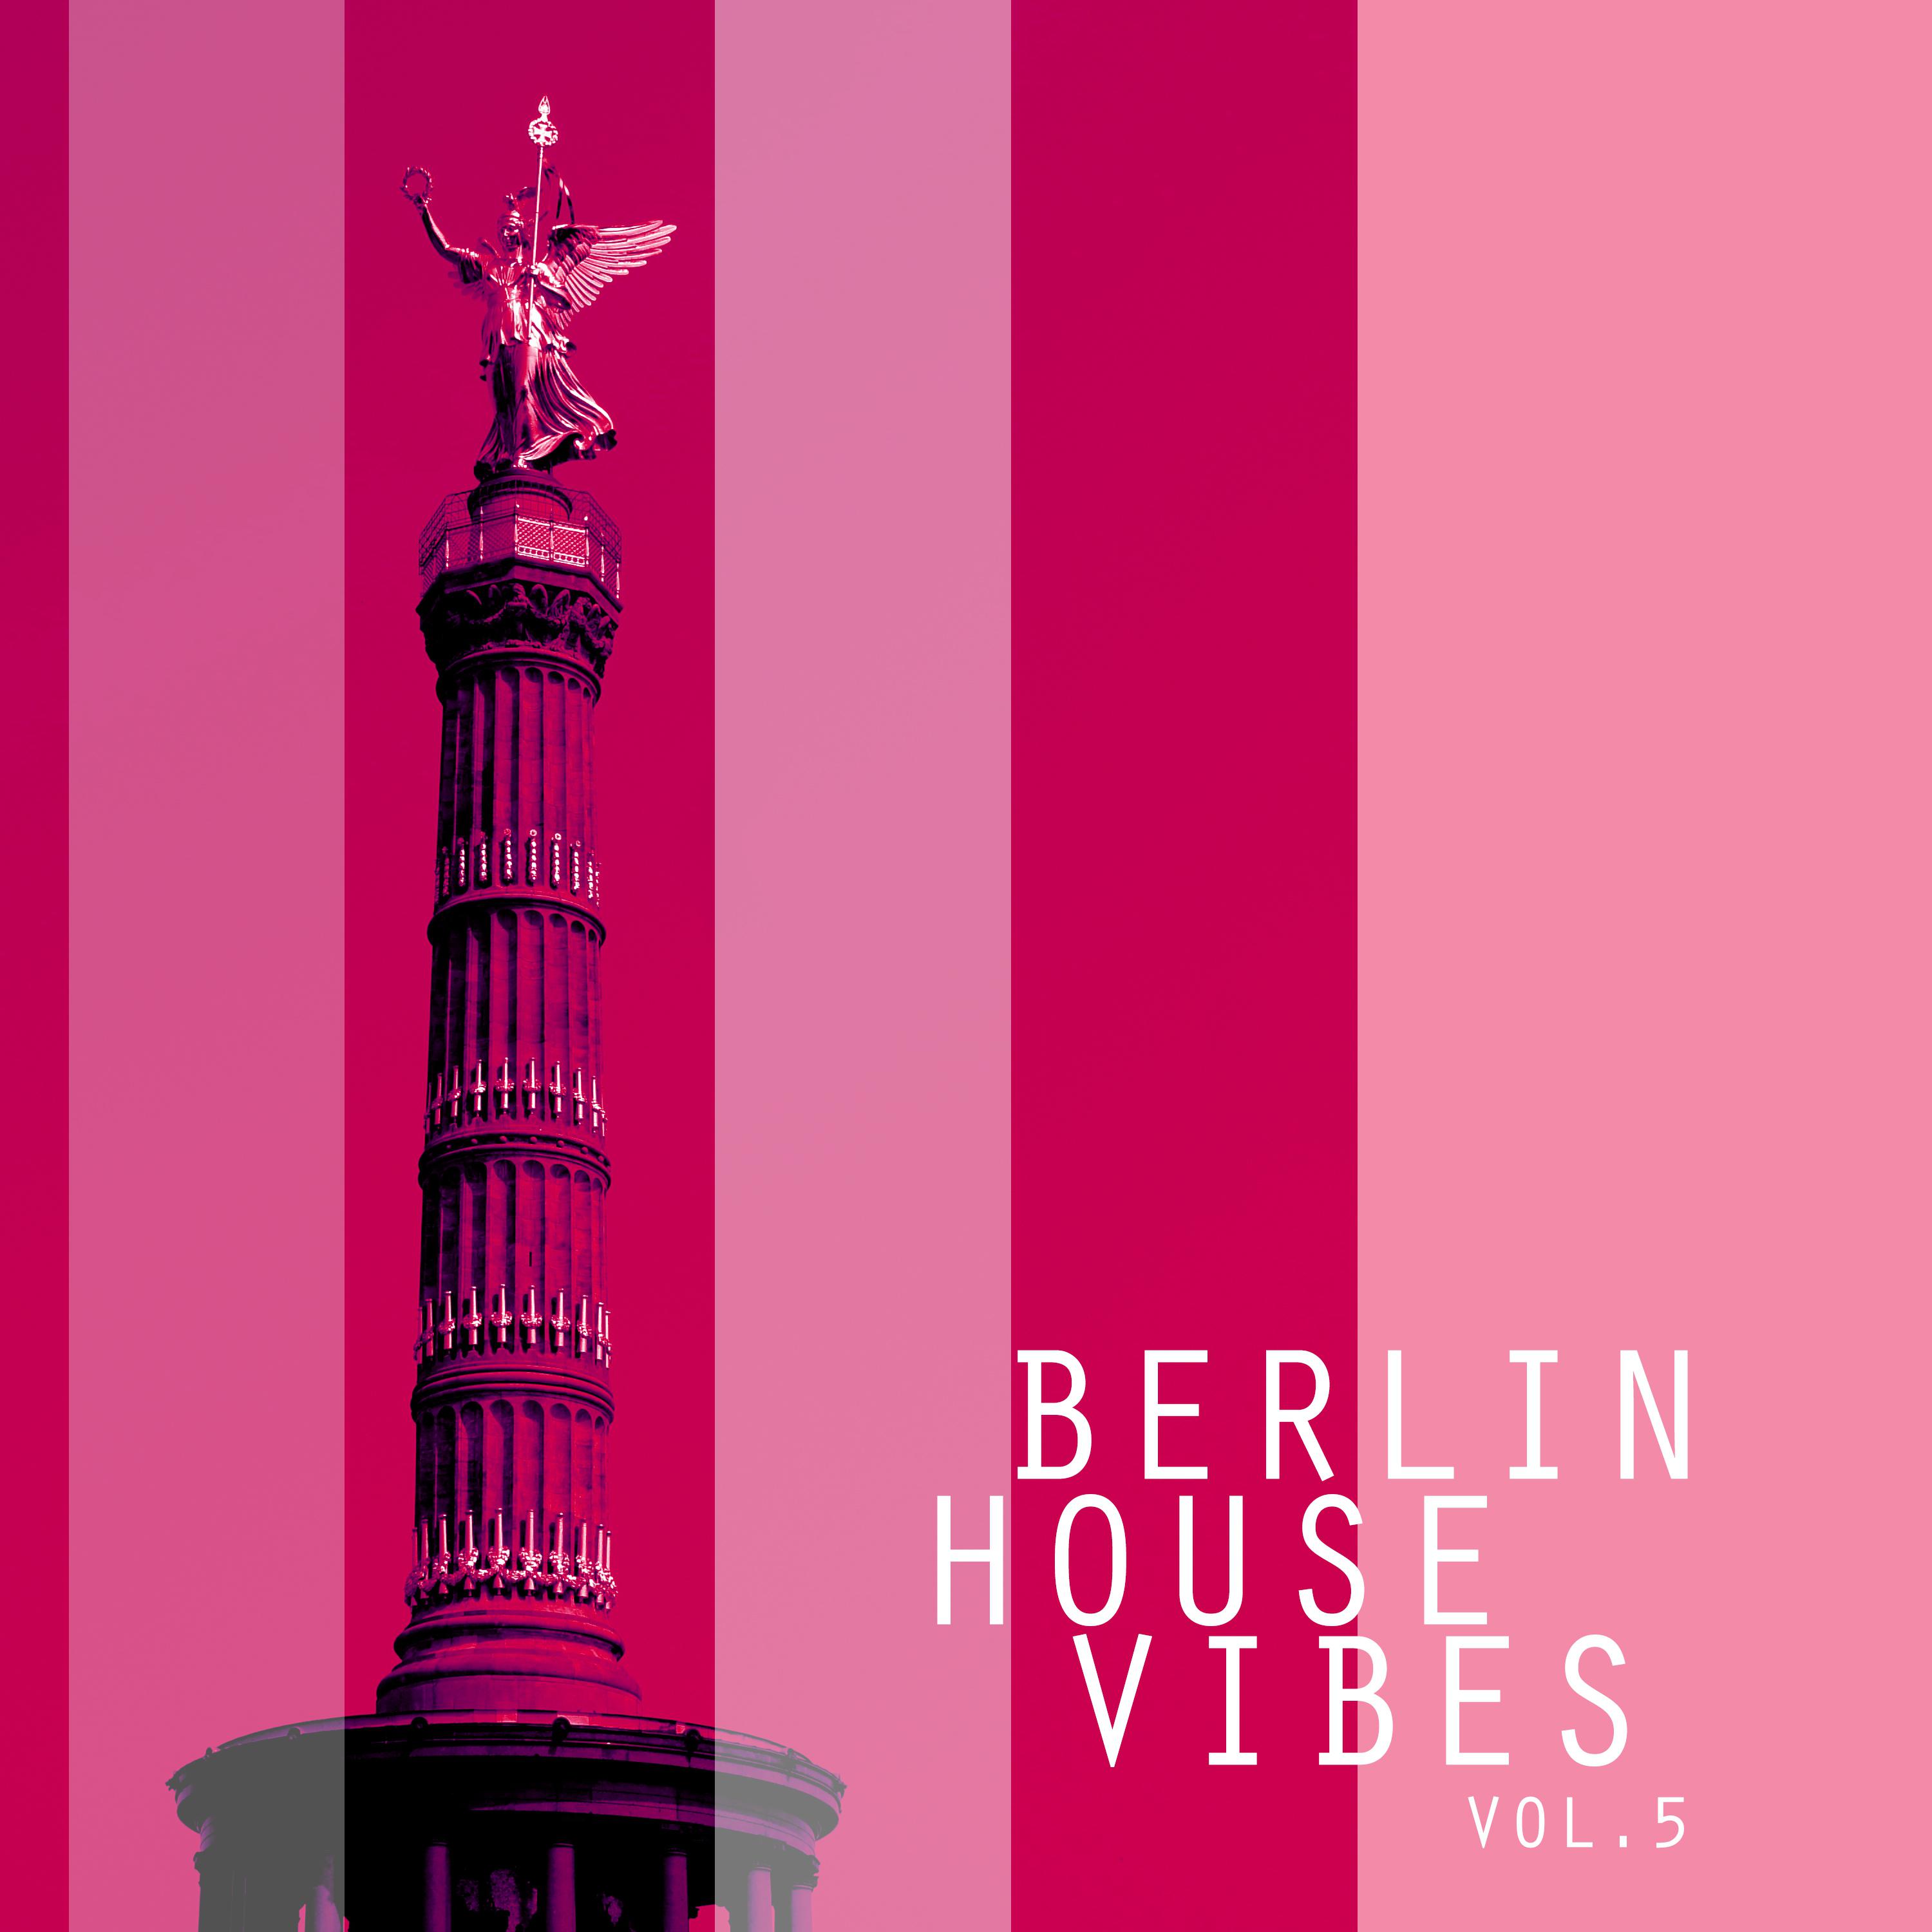 Berlin House Vibes, Vol. 5 - Selection of House Music